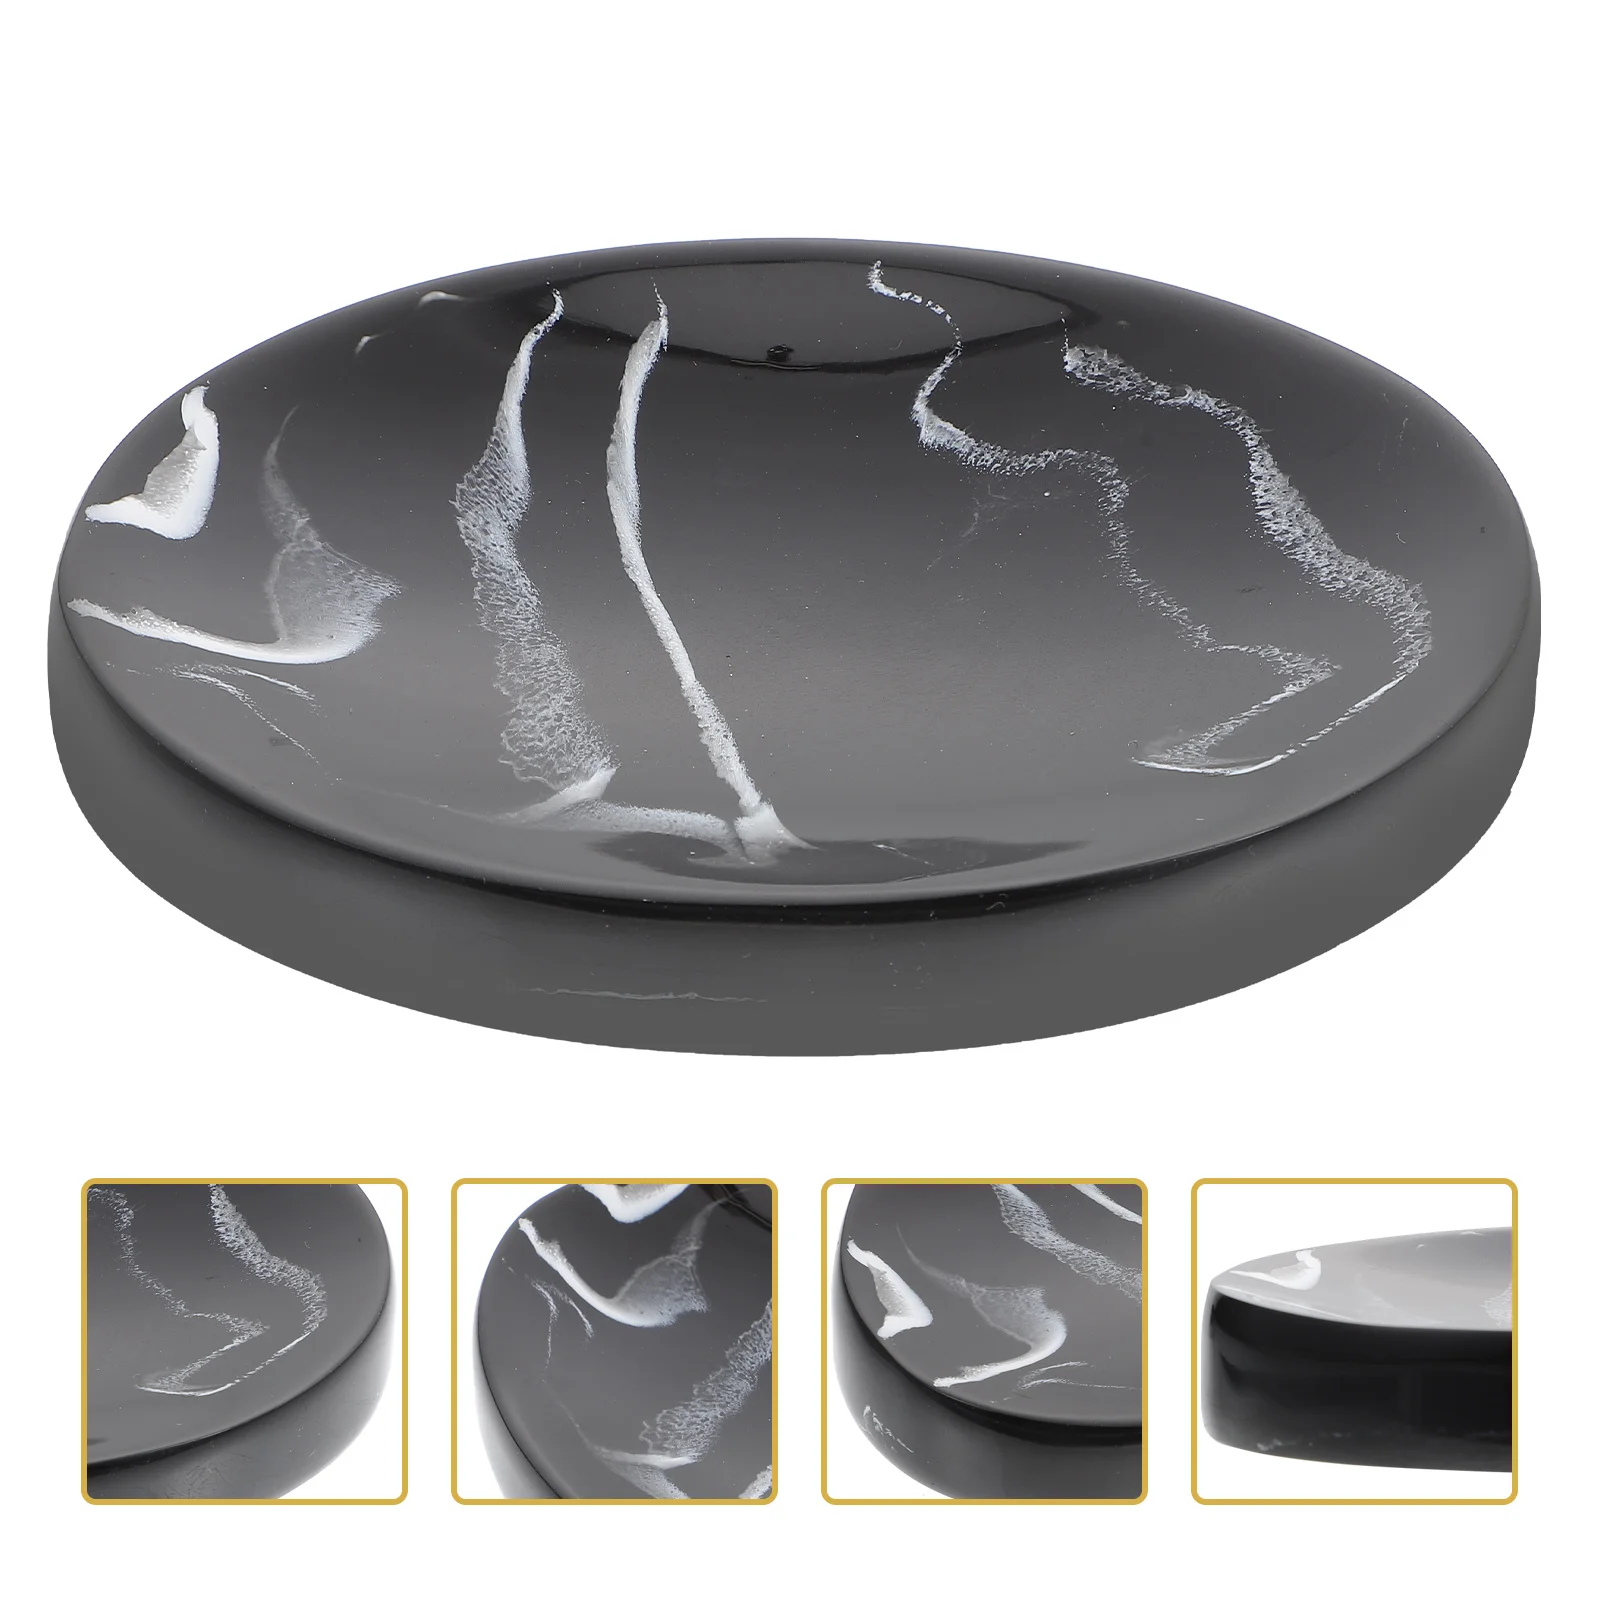 

Marble Dish Jewelry Tray: Bar Holder Nordic Style Sponge Scrubber Holder Saver Container Box Case for Bathroom Kitchen Shower